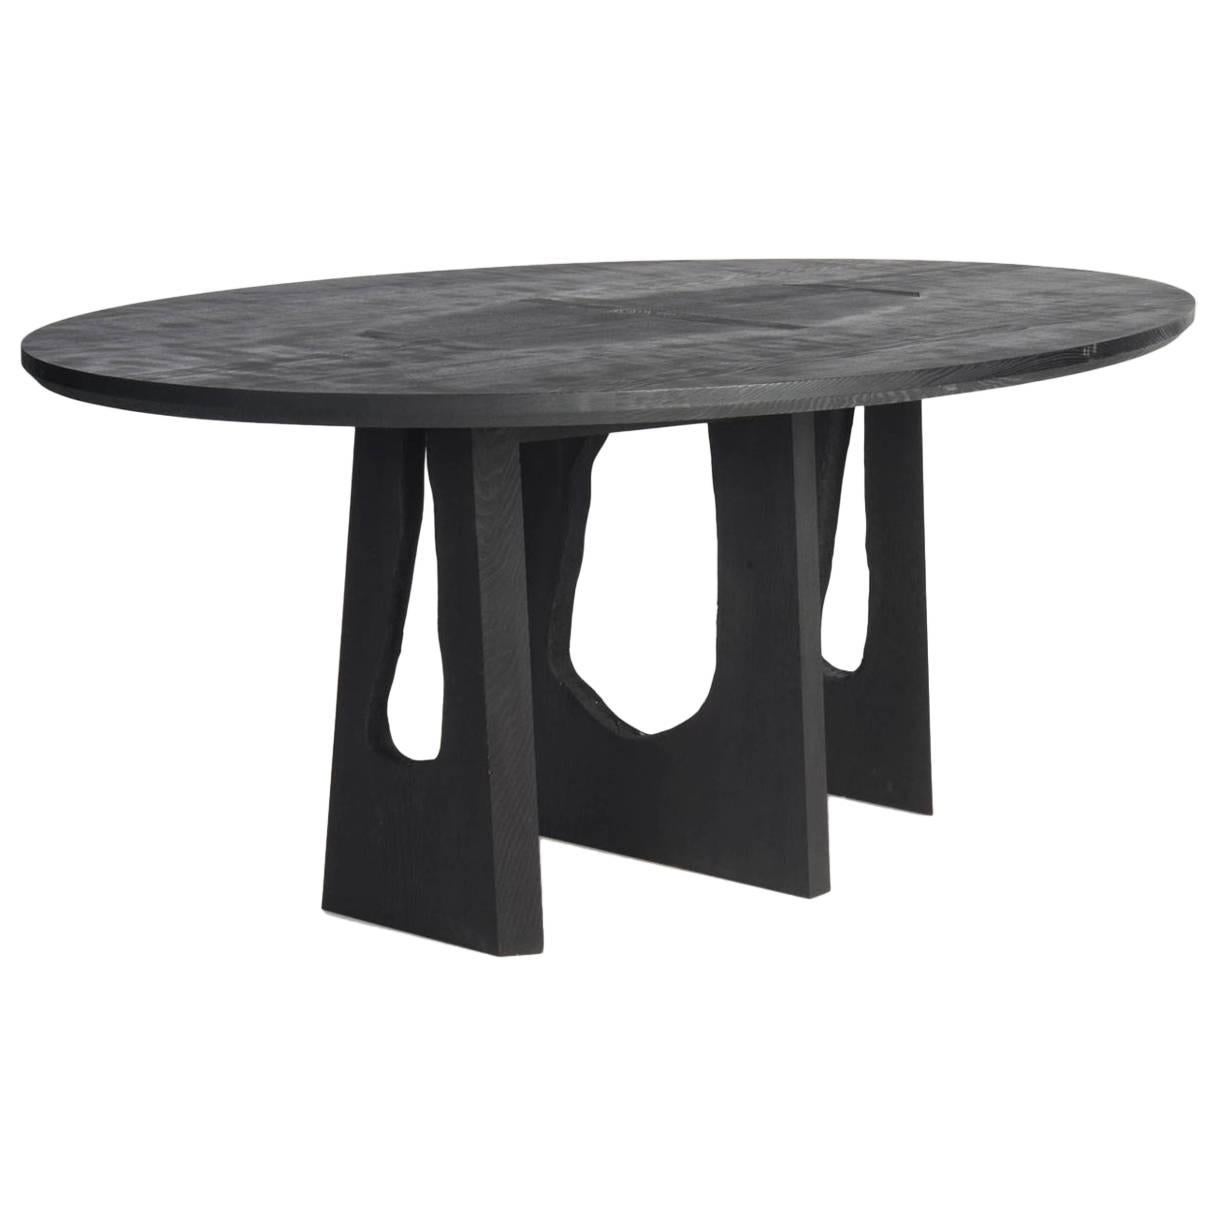 Handmade Black Scorched Ash Dining Table by Sebastian Cox for the New Craftsmen For Sale